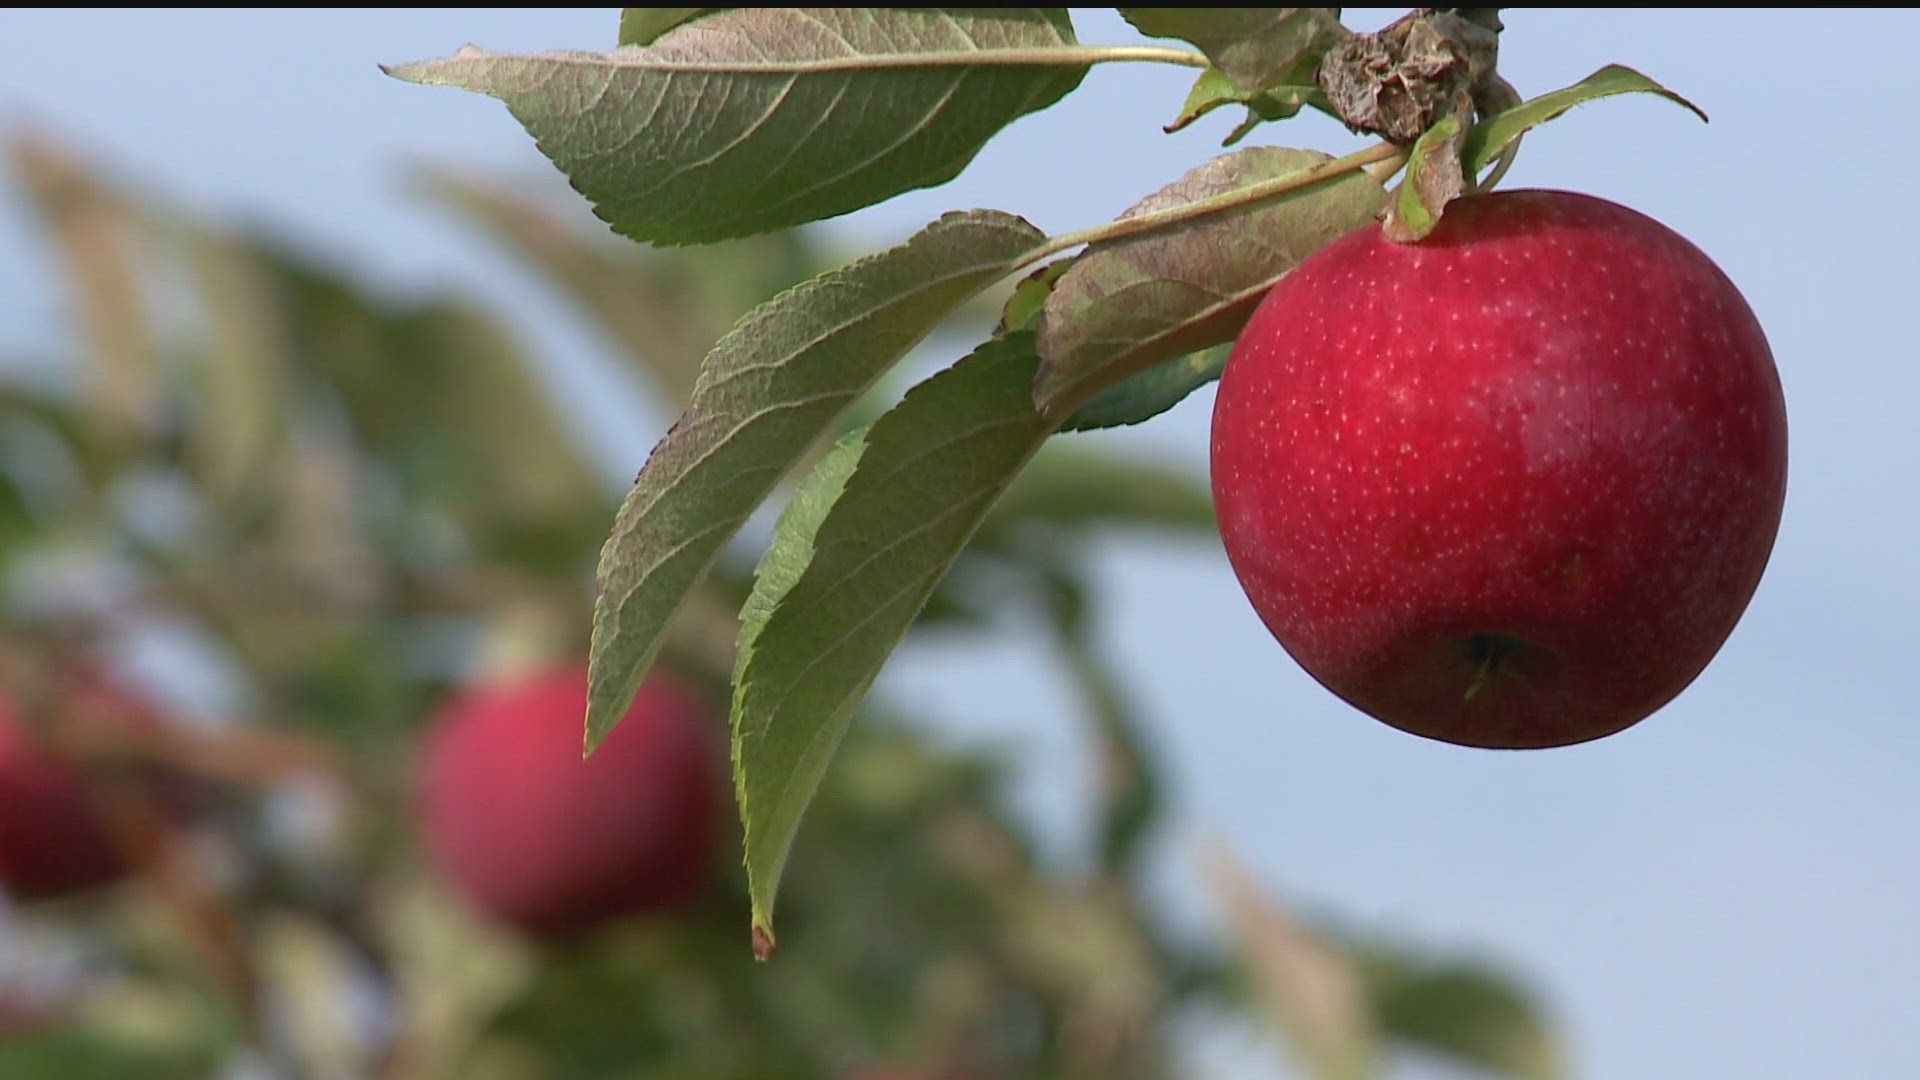 The U revealed its 29th variety of apple, MN33, which will be sold under the brand name Kudos when it's available for consumers in the next two to three years.